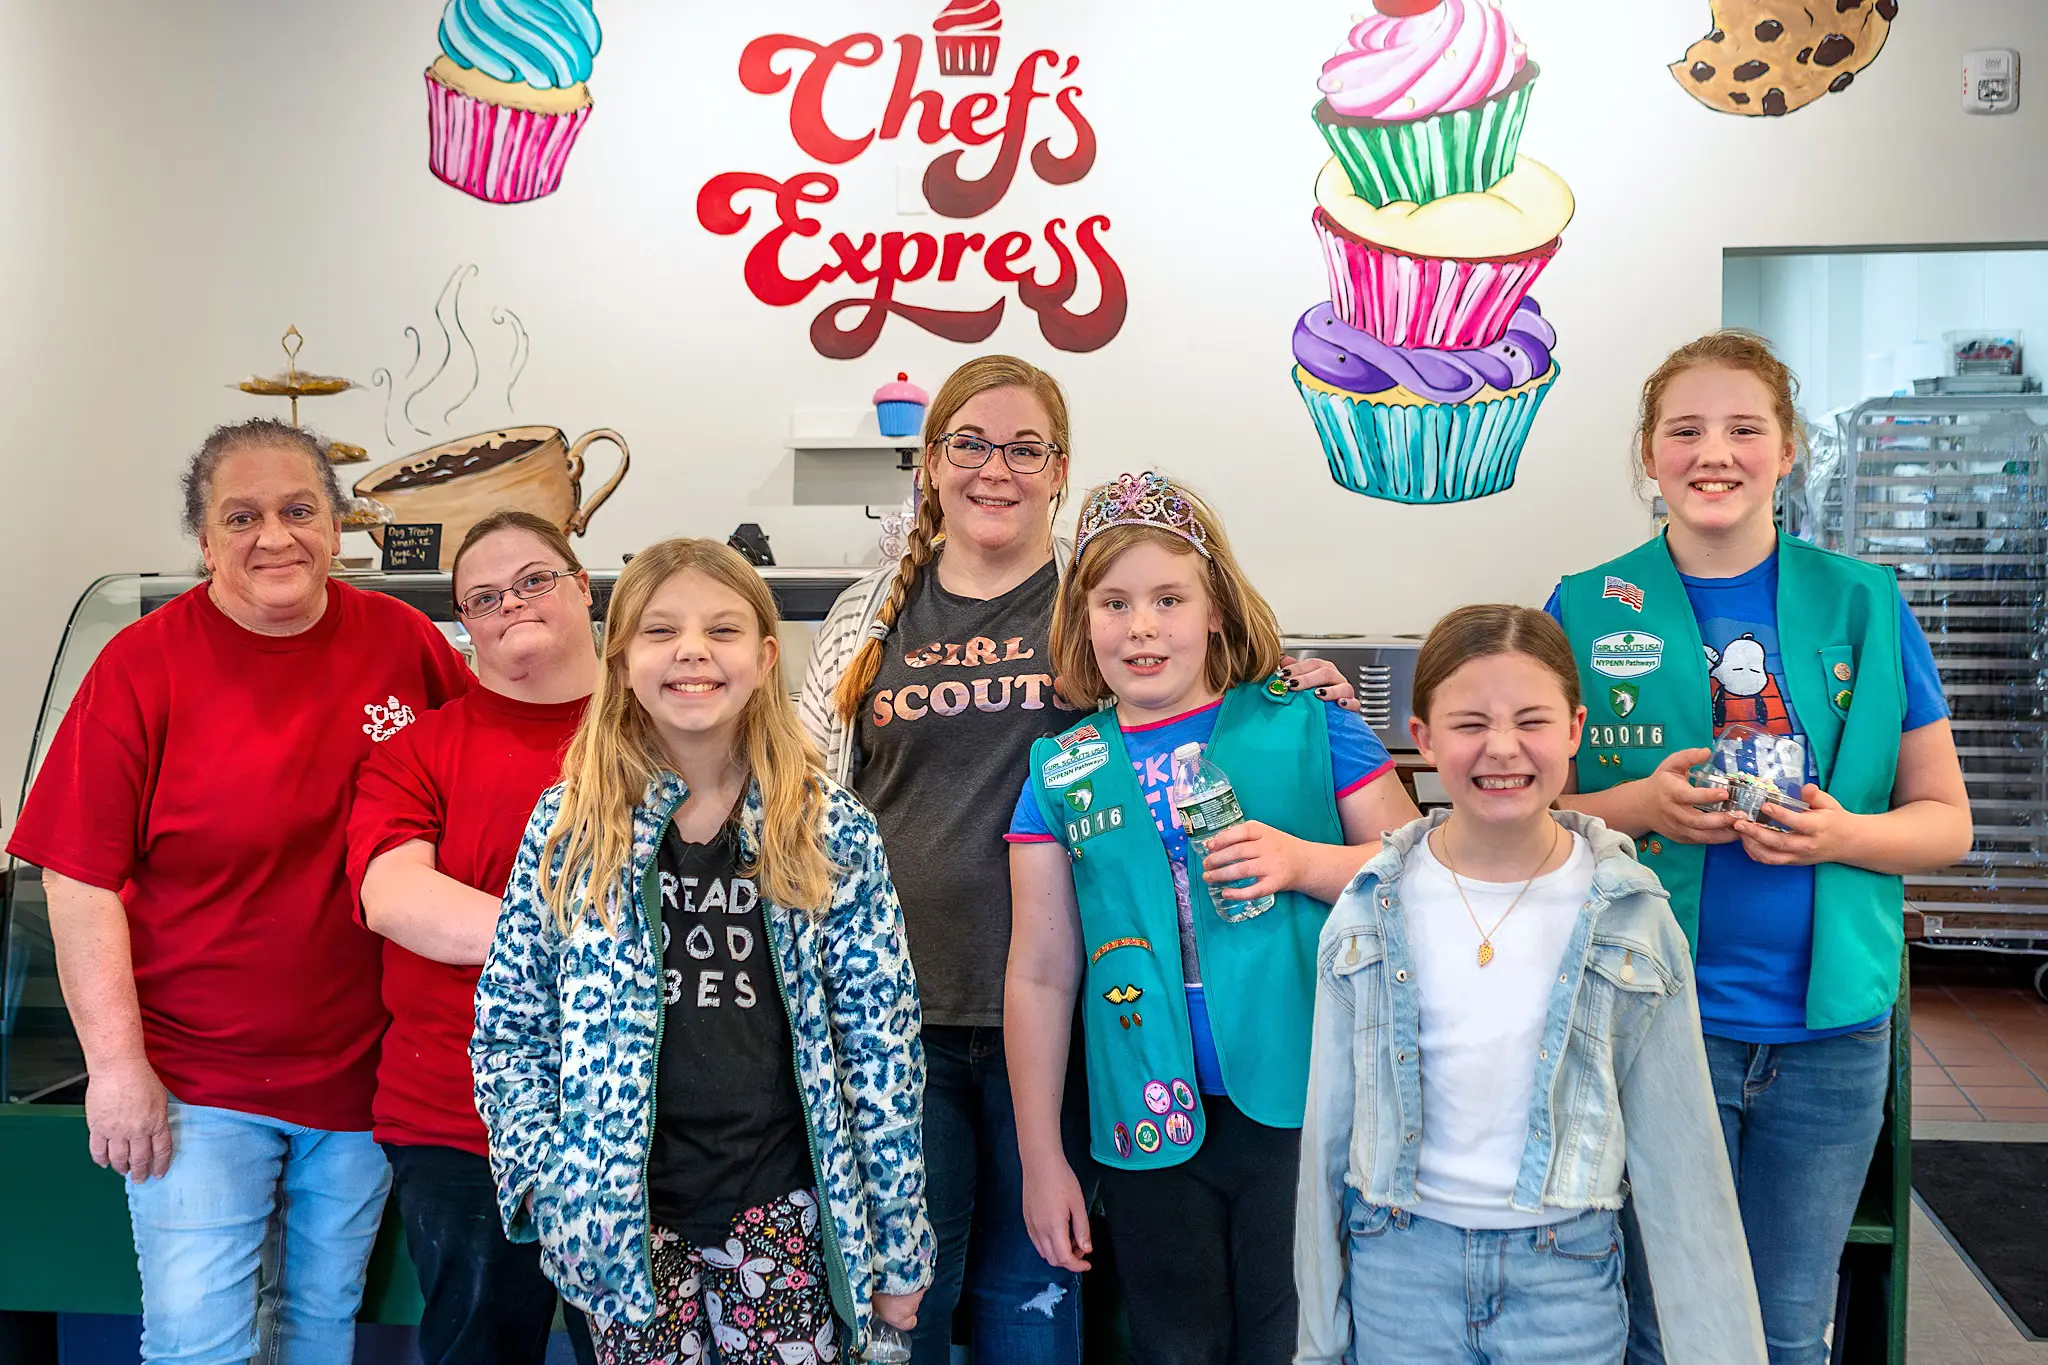 Chef’s Express Invites Girl Scouts To Tag Along